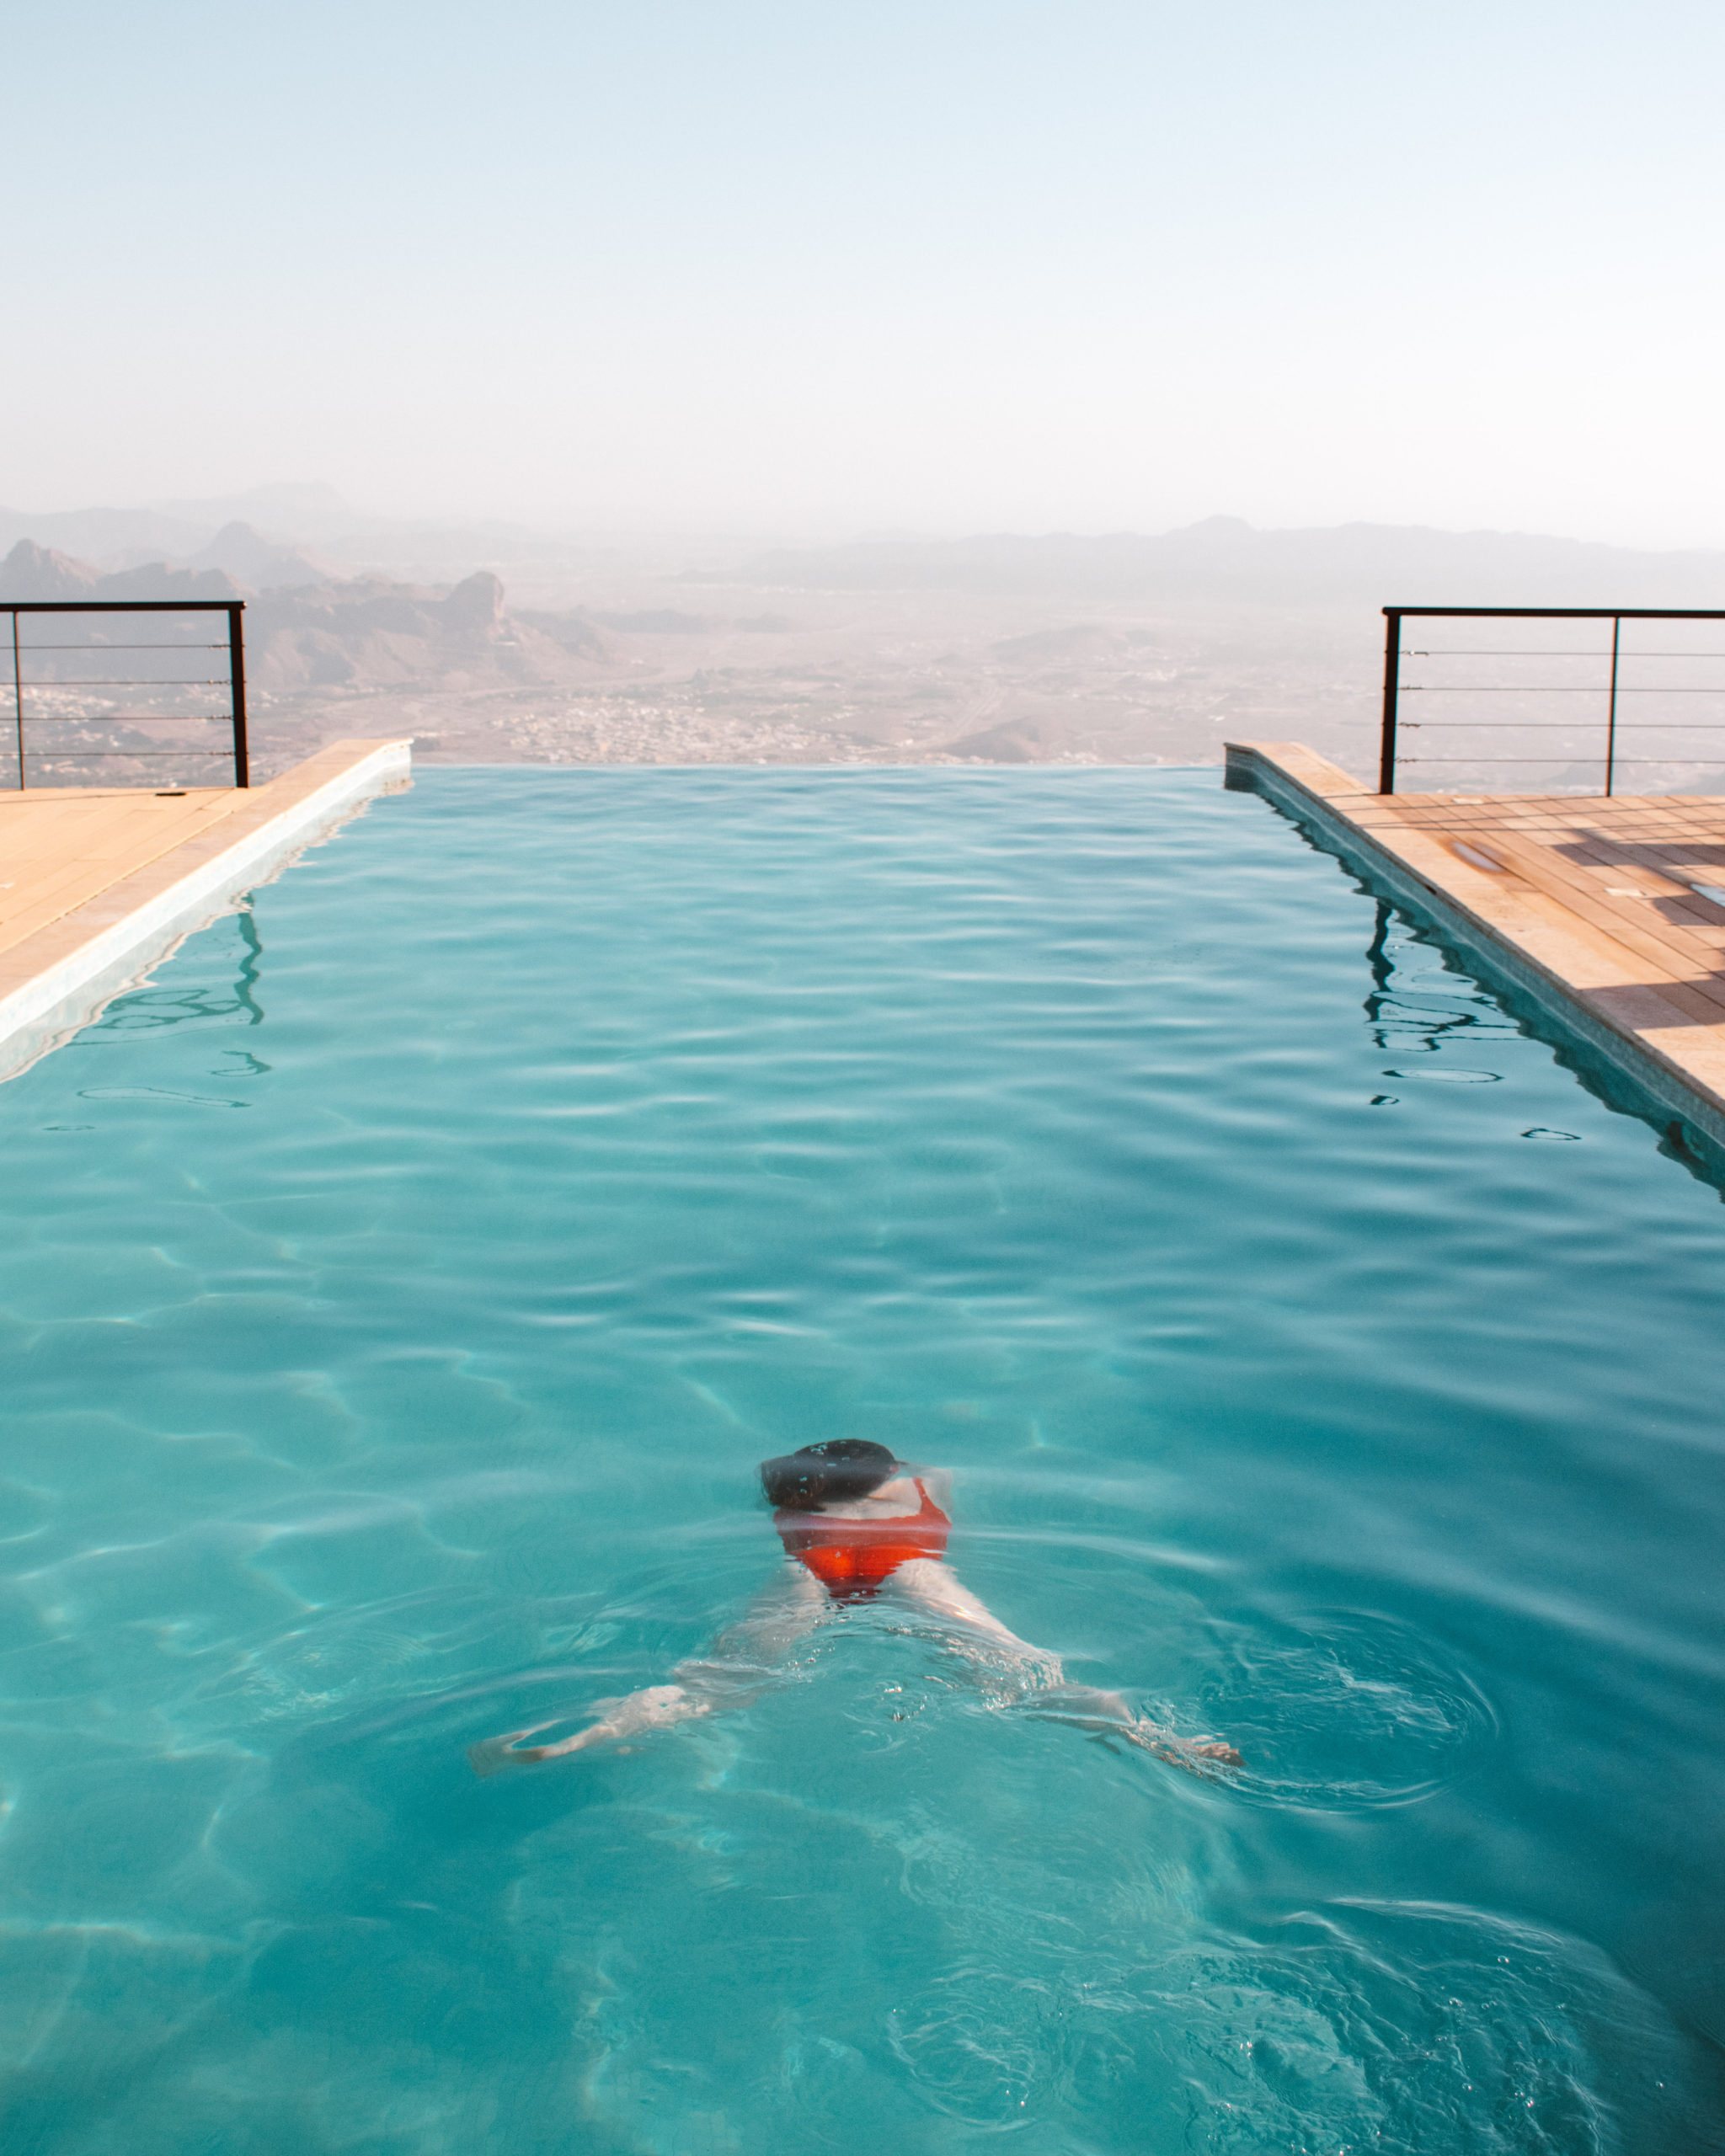 CHECK IN: THE VIEW, OMAN